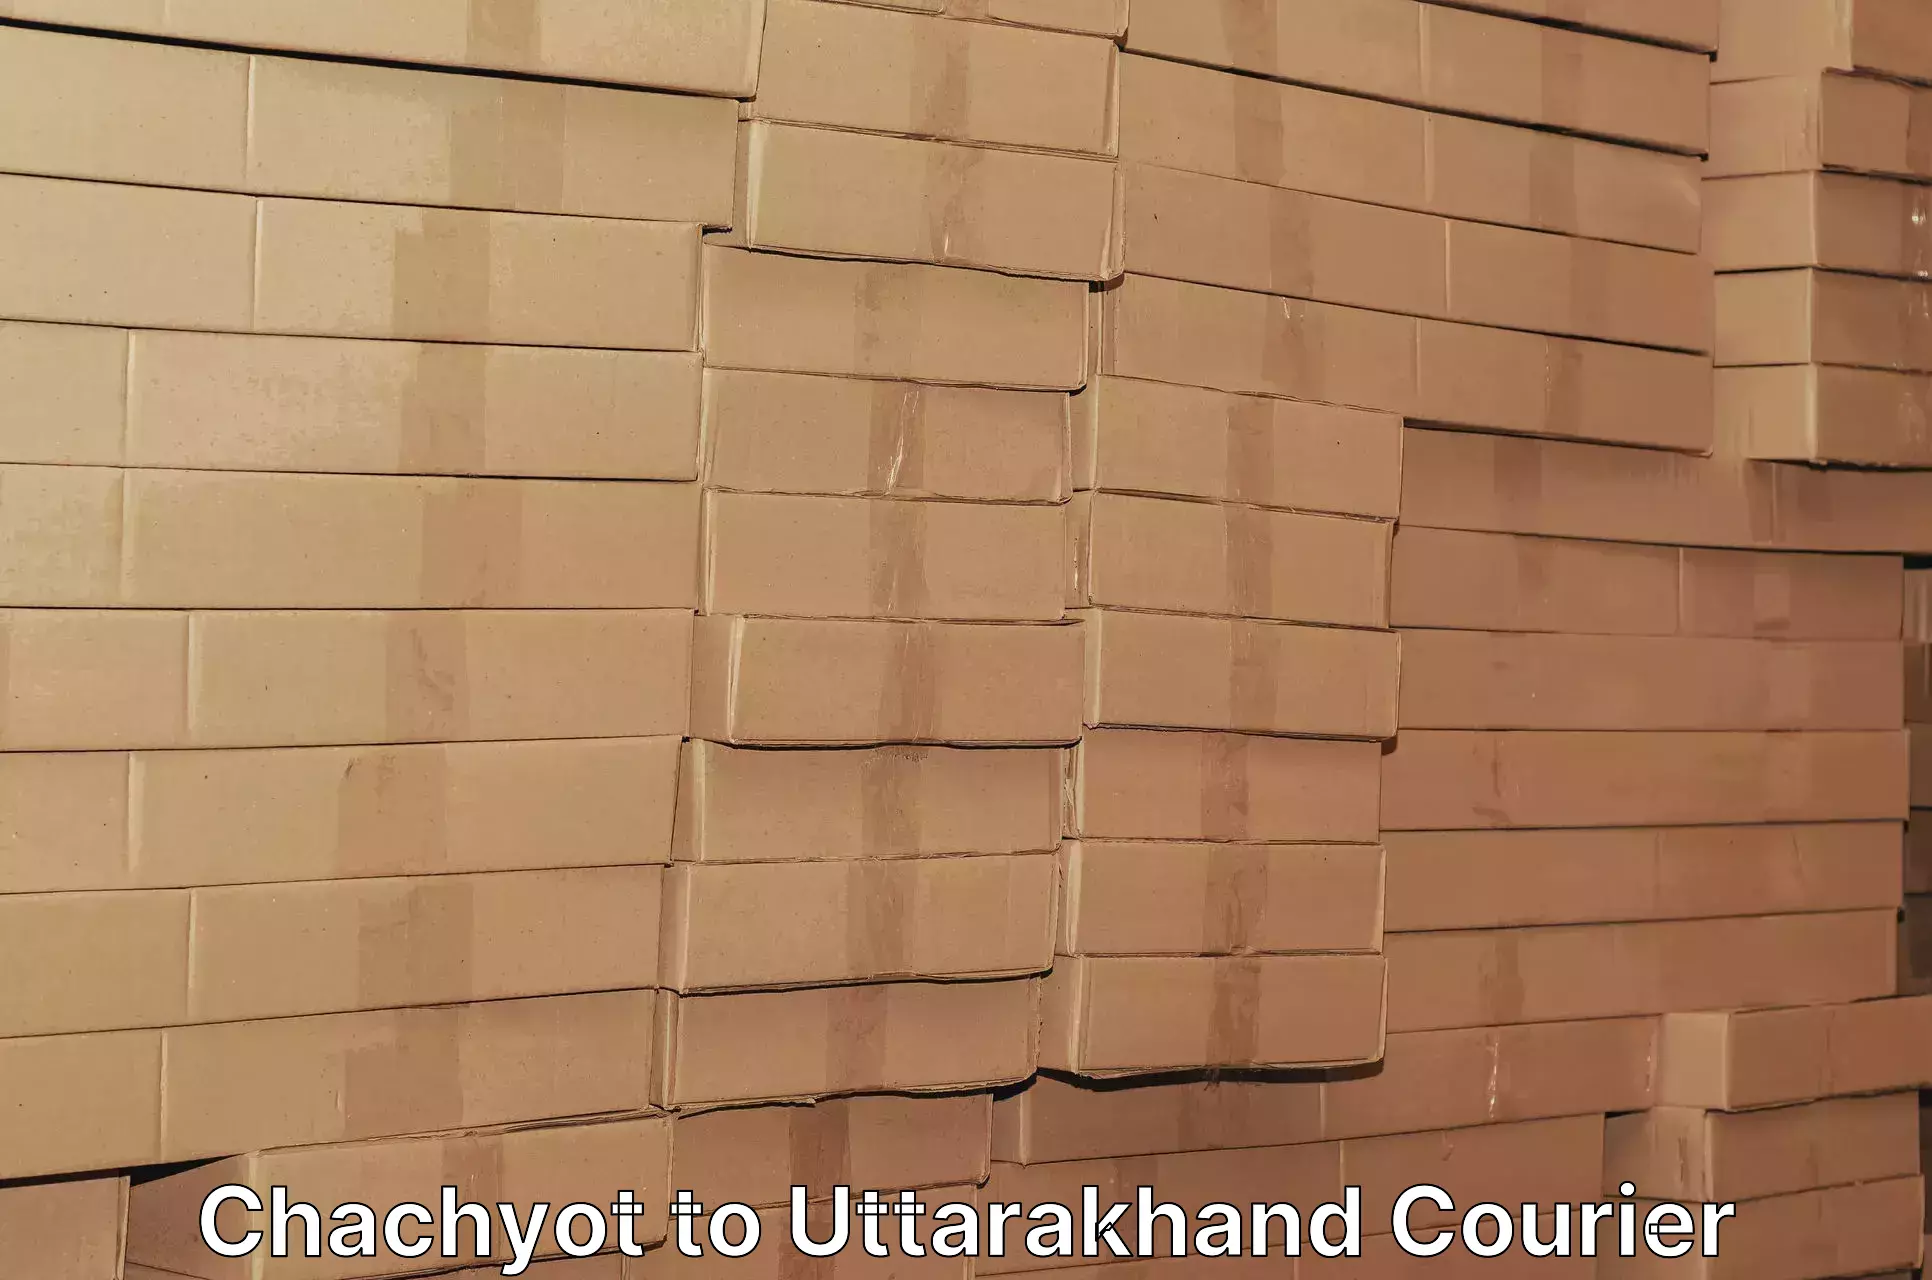 Ocean freight courier Chachyot to Tehri Garhwal